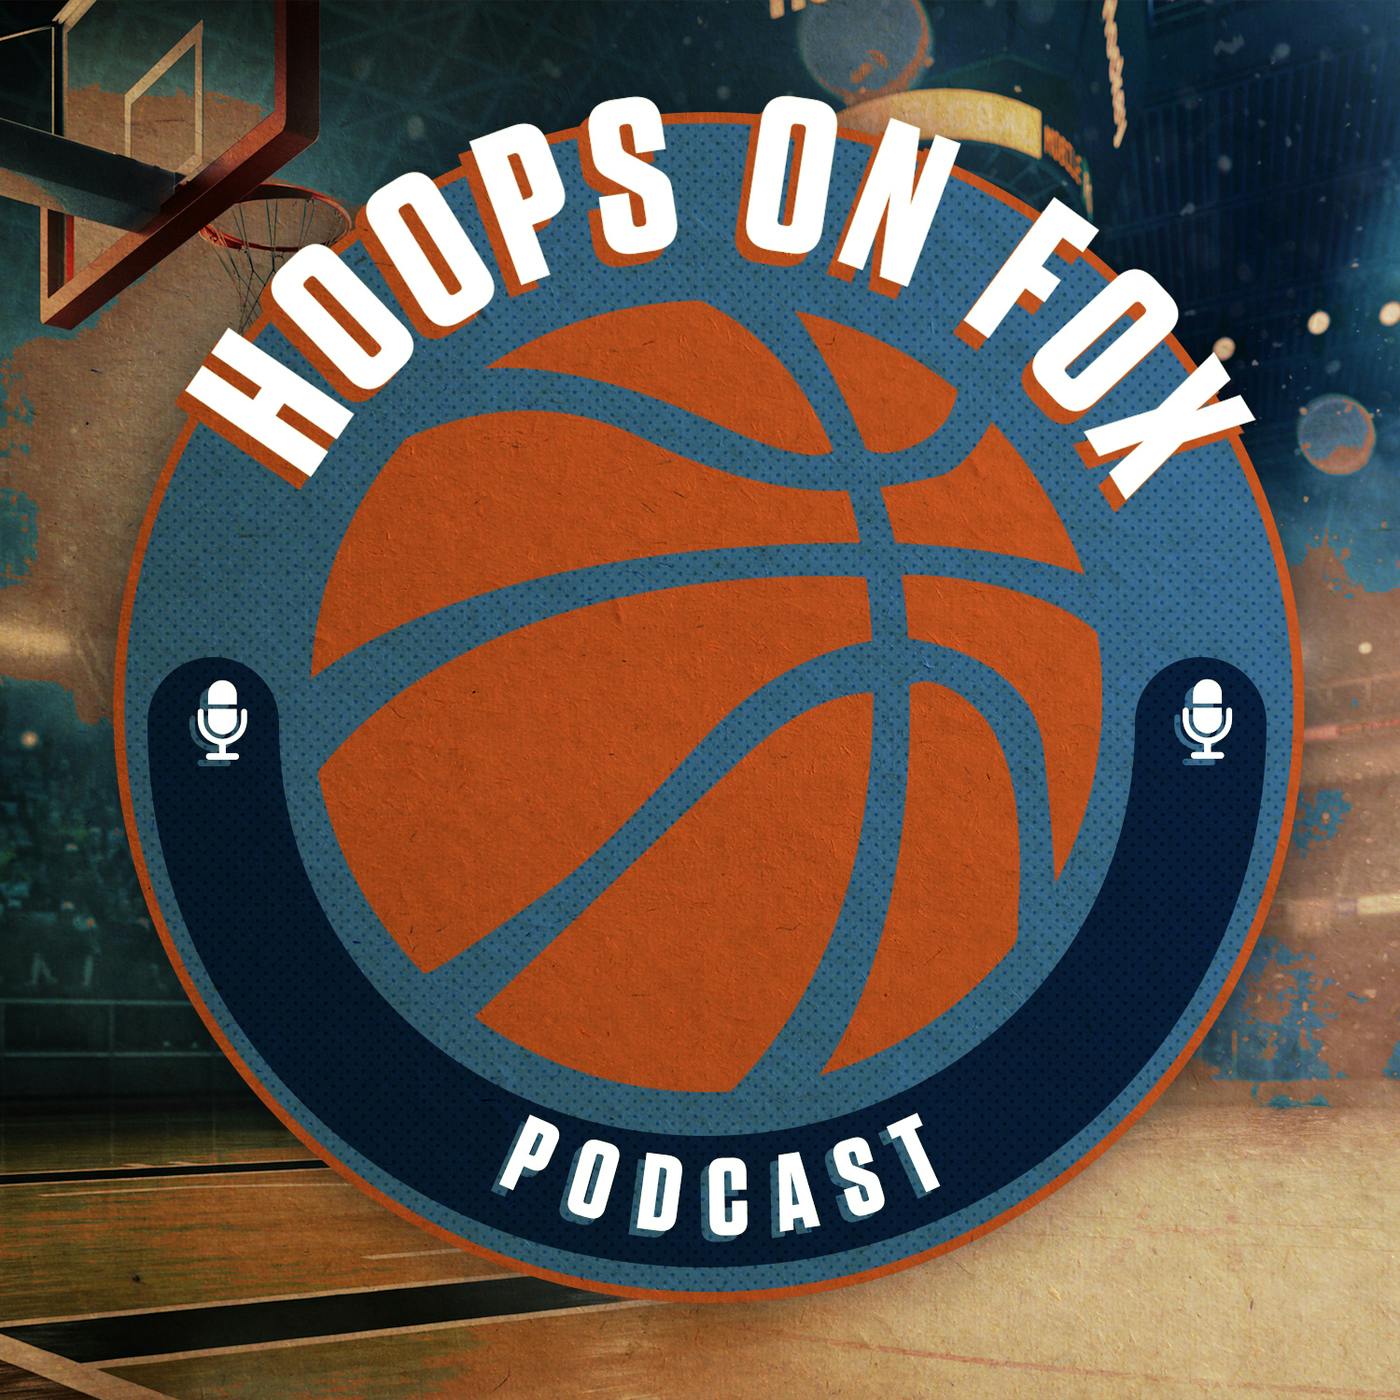 Ep 38 - Michael Rapaport on the Knicks + All-Star Draft